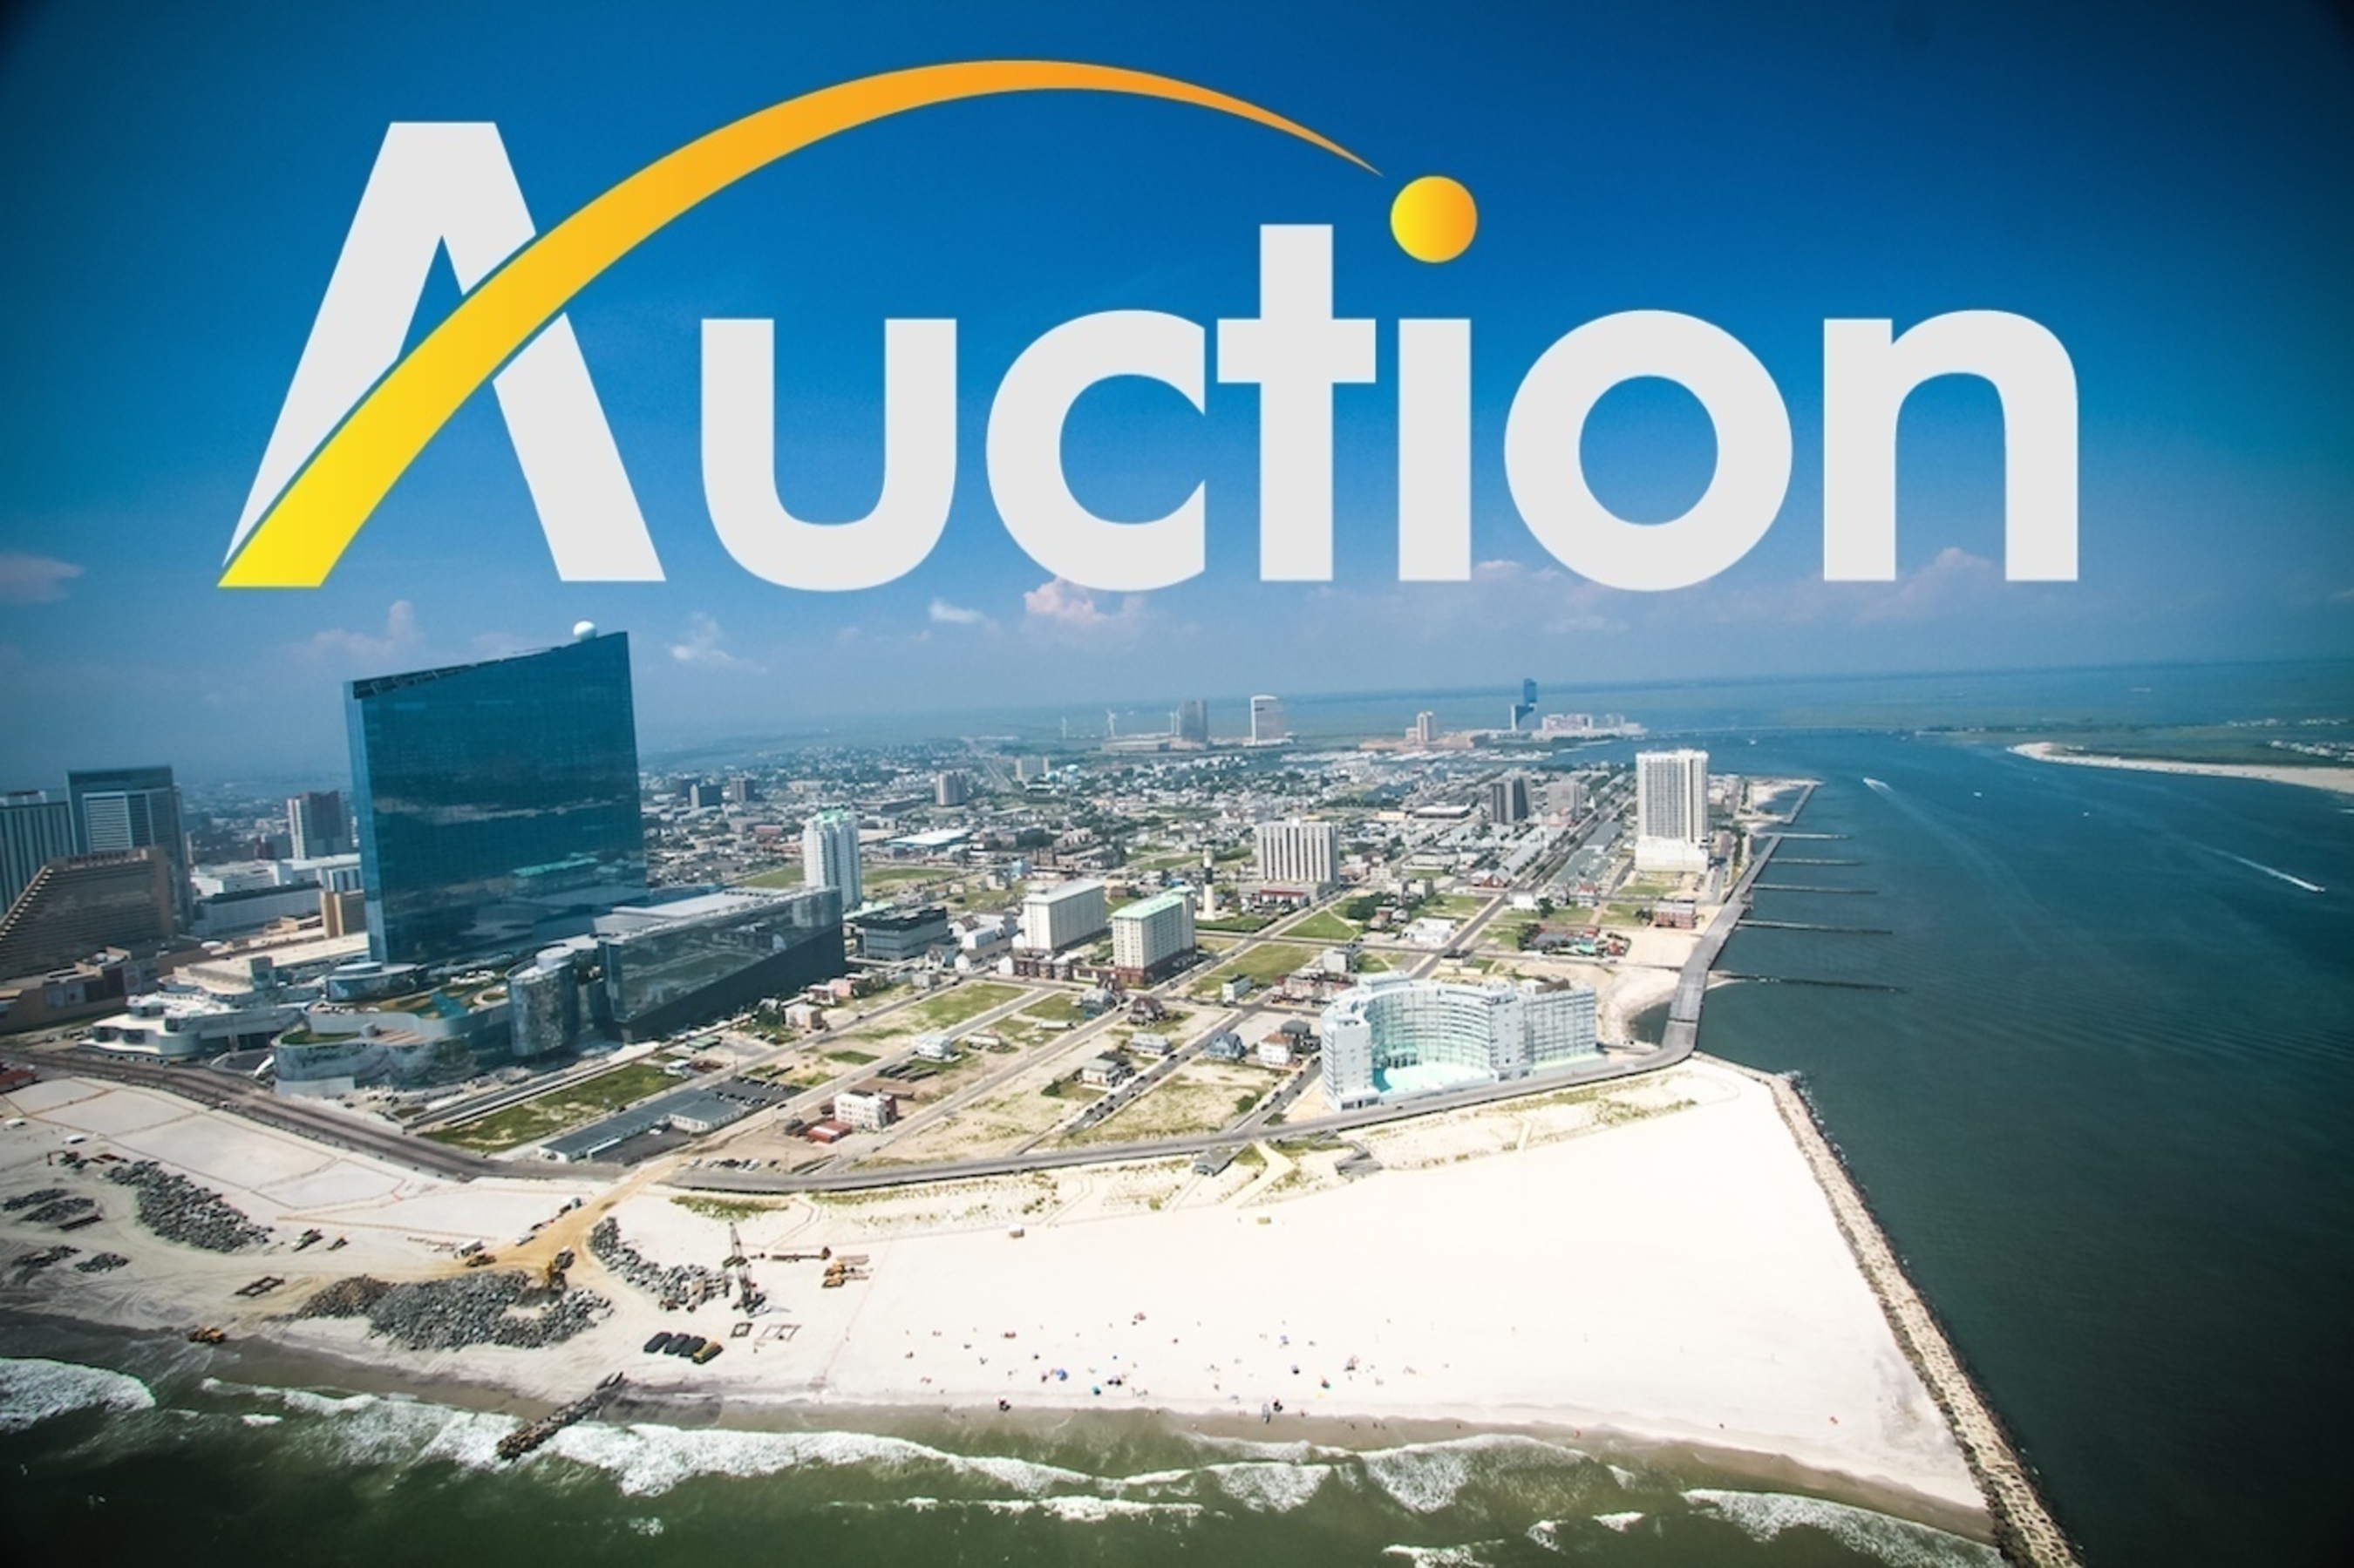 One Of The Last Boardwalk Development Opportunities And Several Adjacent Lots In The South Inlet Of Atlantic City Are Being Sold At Bankruptcy Auction (PRNewsFoto/AuctionAdvisors)